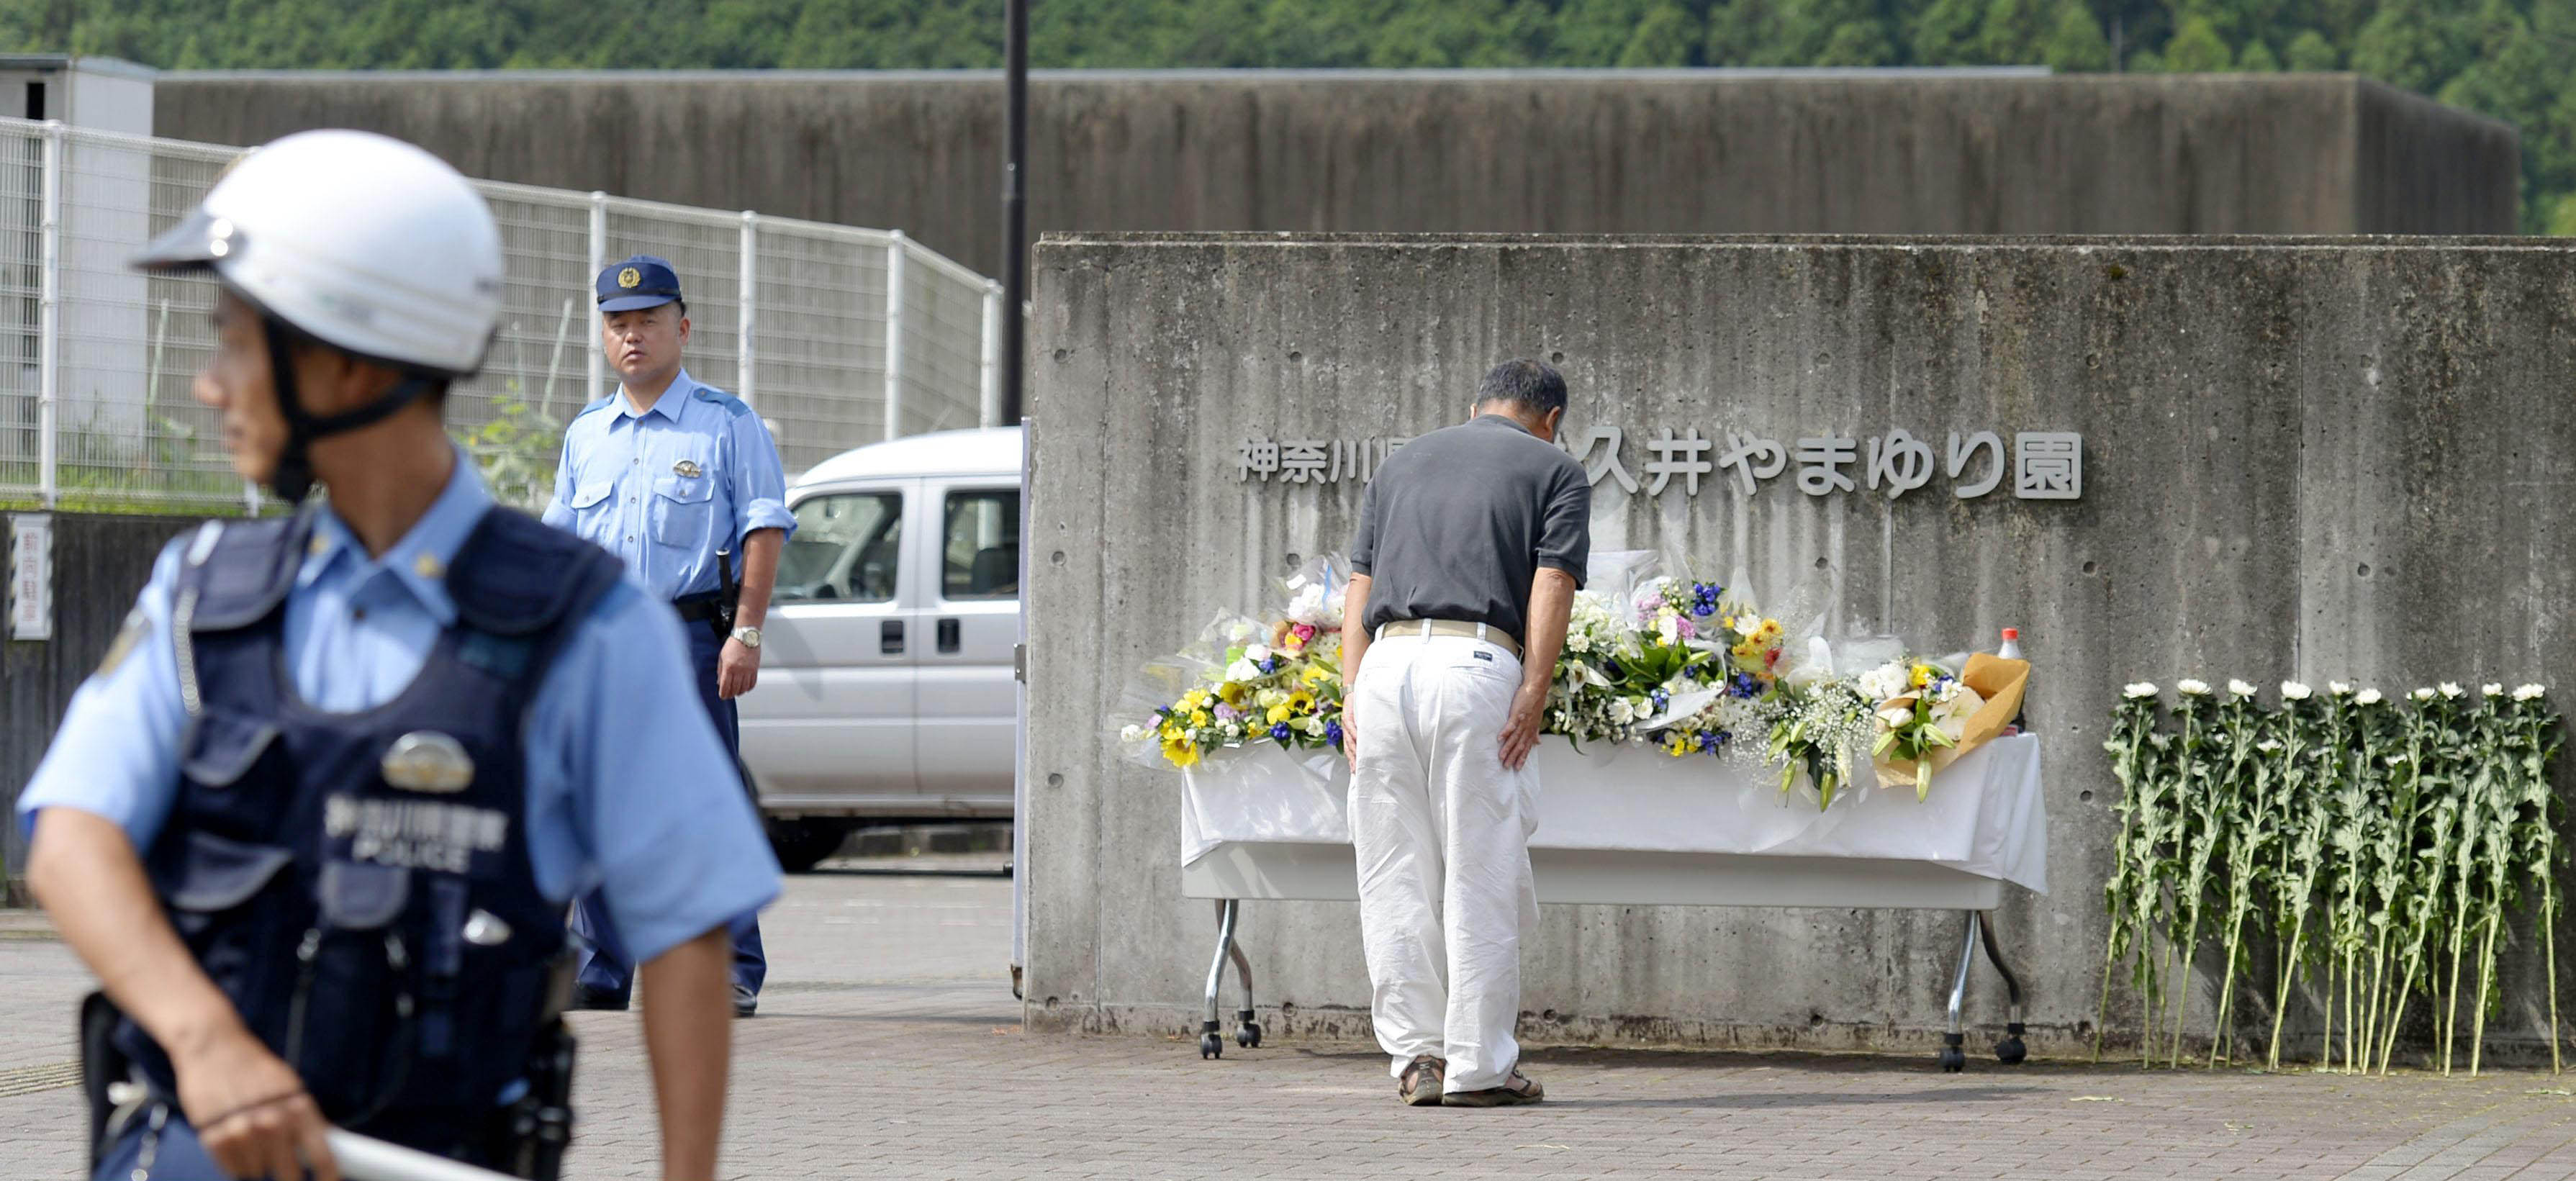 A man bows while paying his respects in front of the Tsukui Yamayuri En care facility in Kanagawa on Thursday where Tuesday's knife attack took place. | KYODO